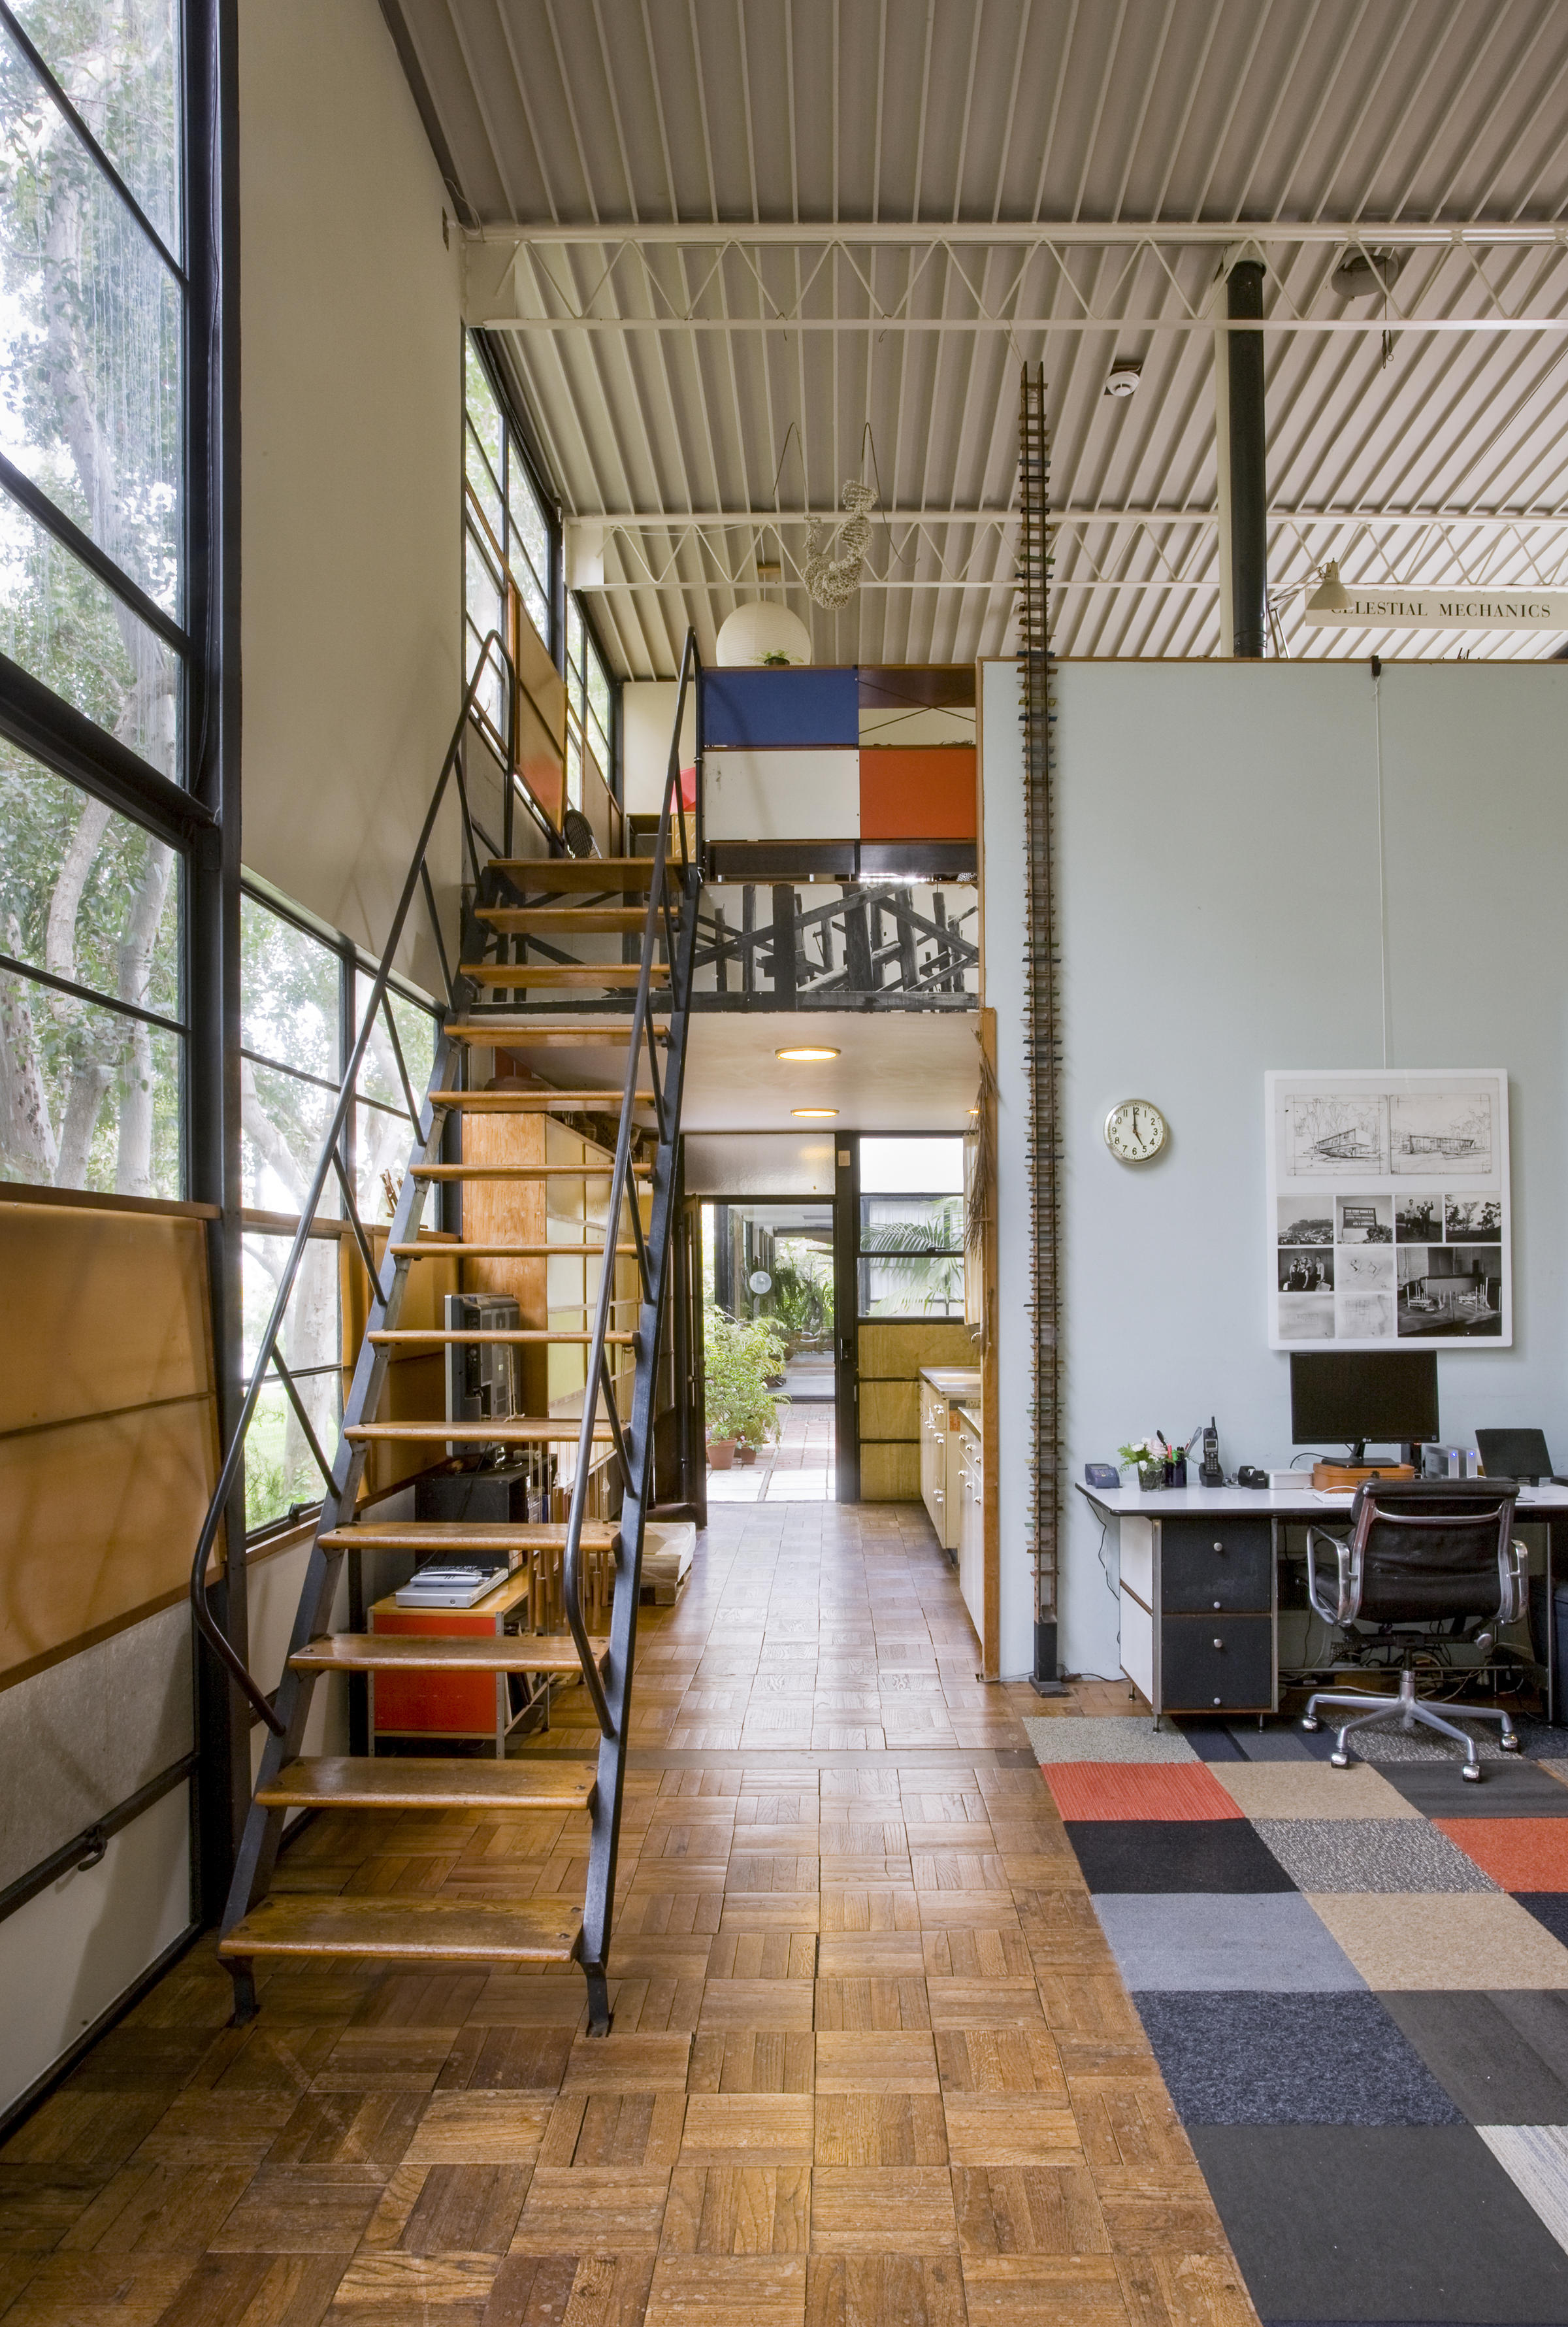 Charles And Ray Eames Made Life Better By Design Their Home - 